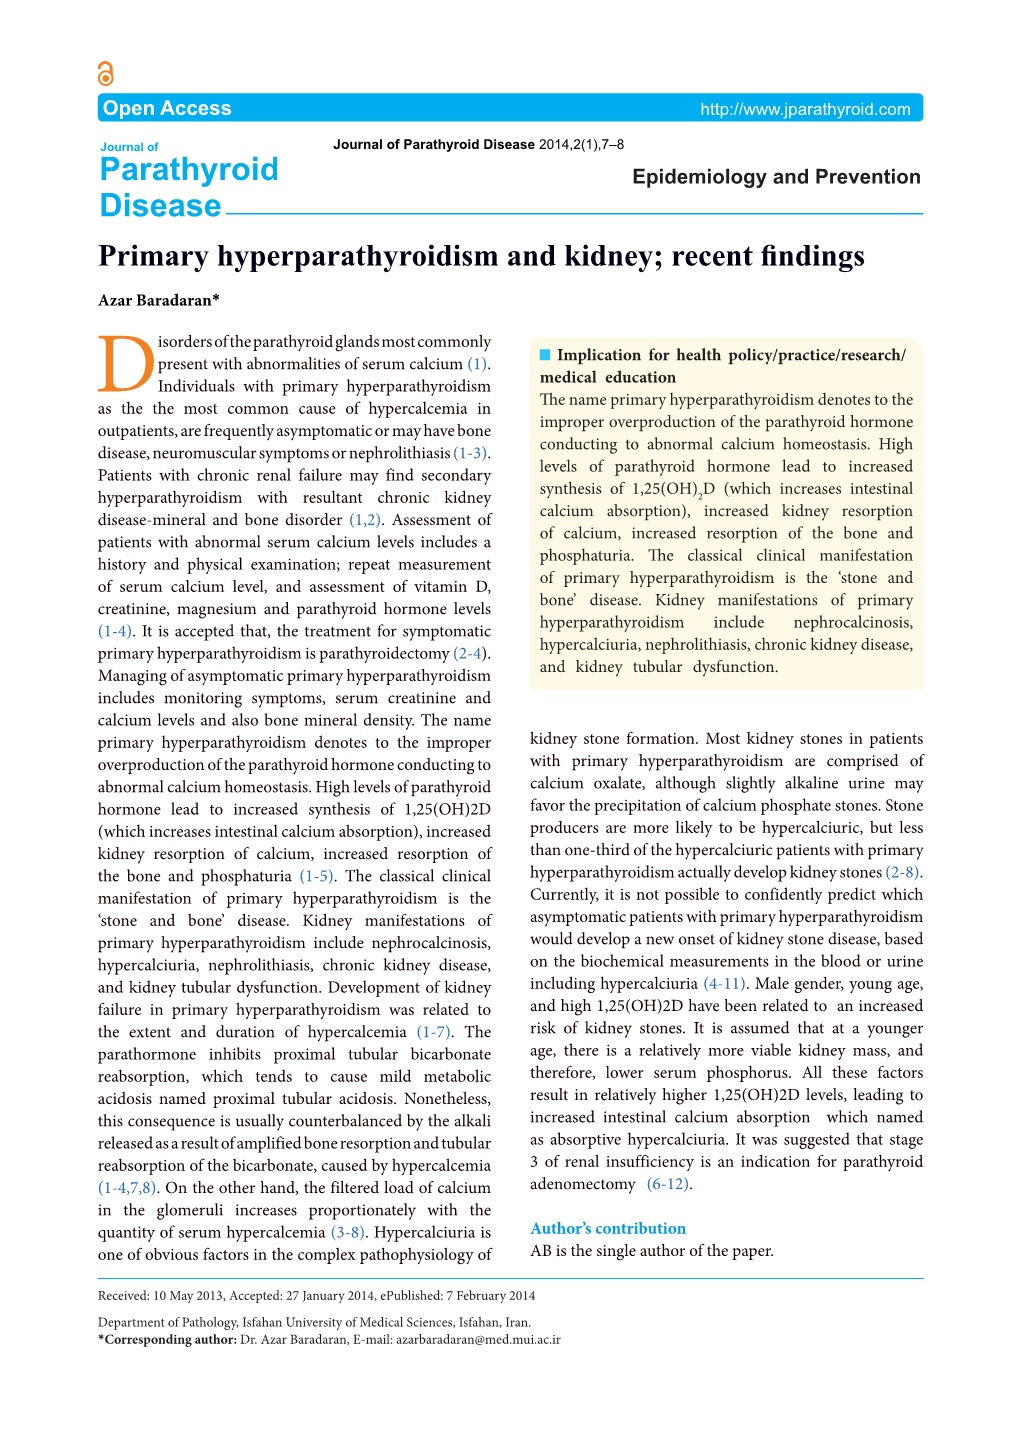 Primary Hyperparathyroidism and Kidney; Recent Findings